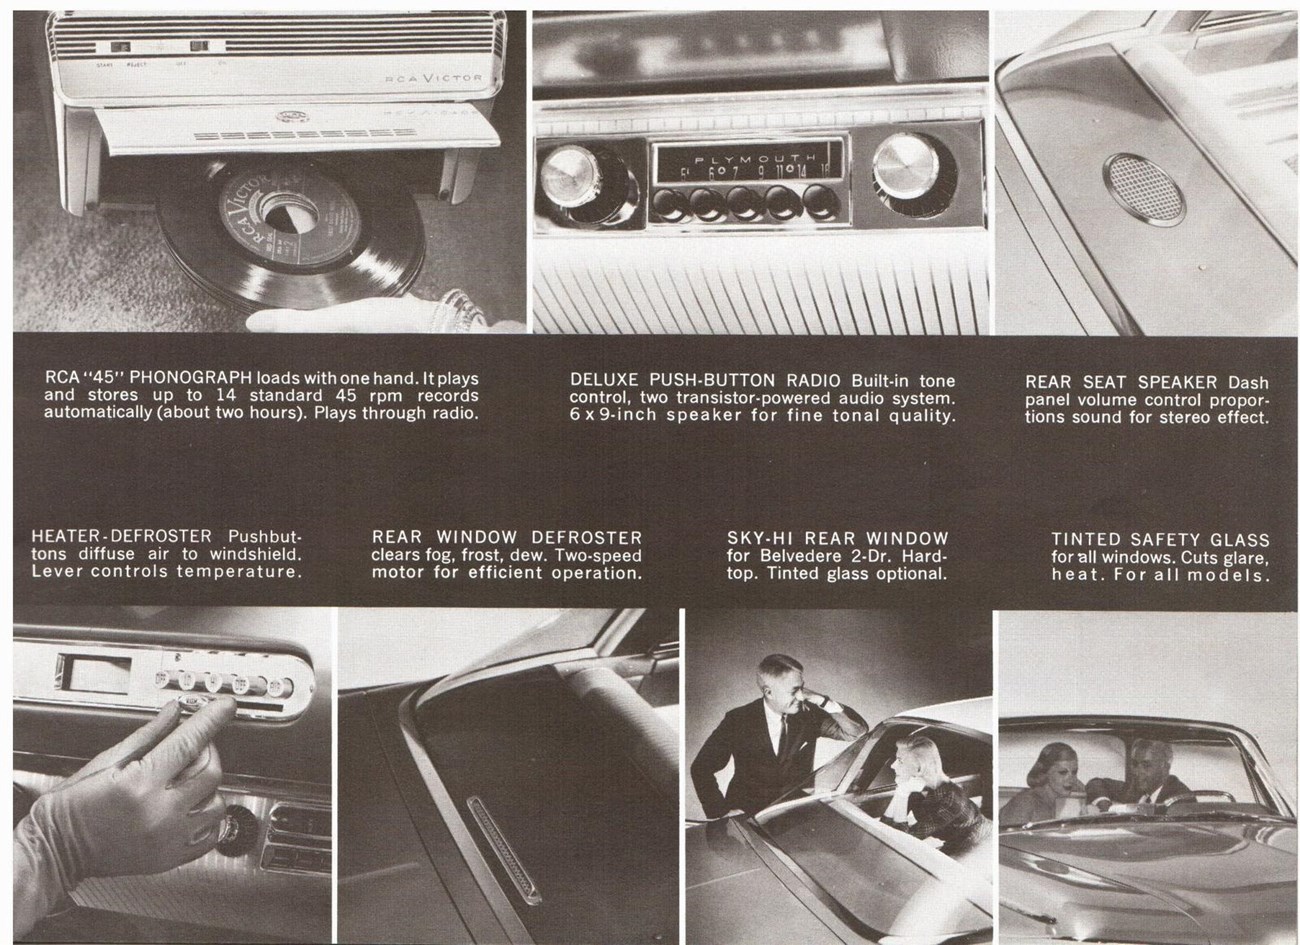 1960s Plymouth Accessories Book depicting the RCA 45 phonograph